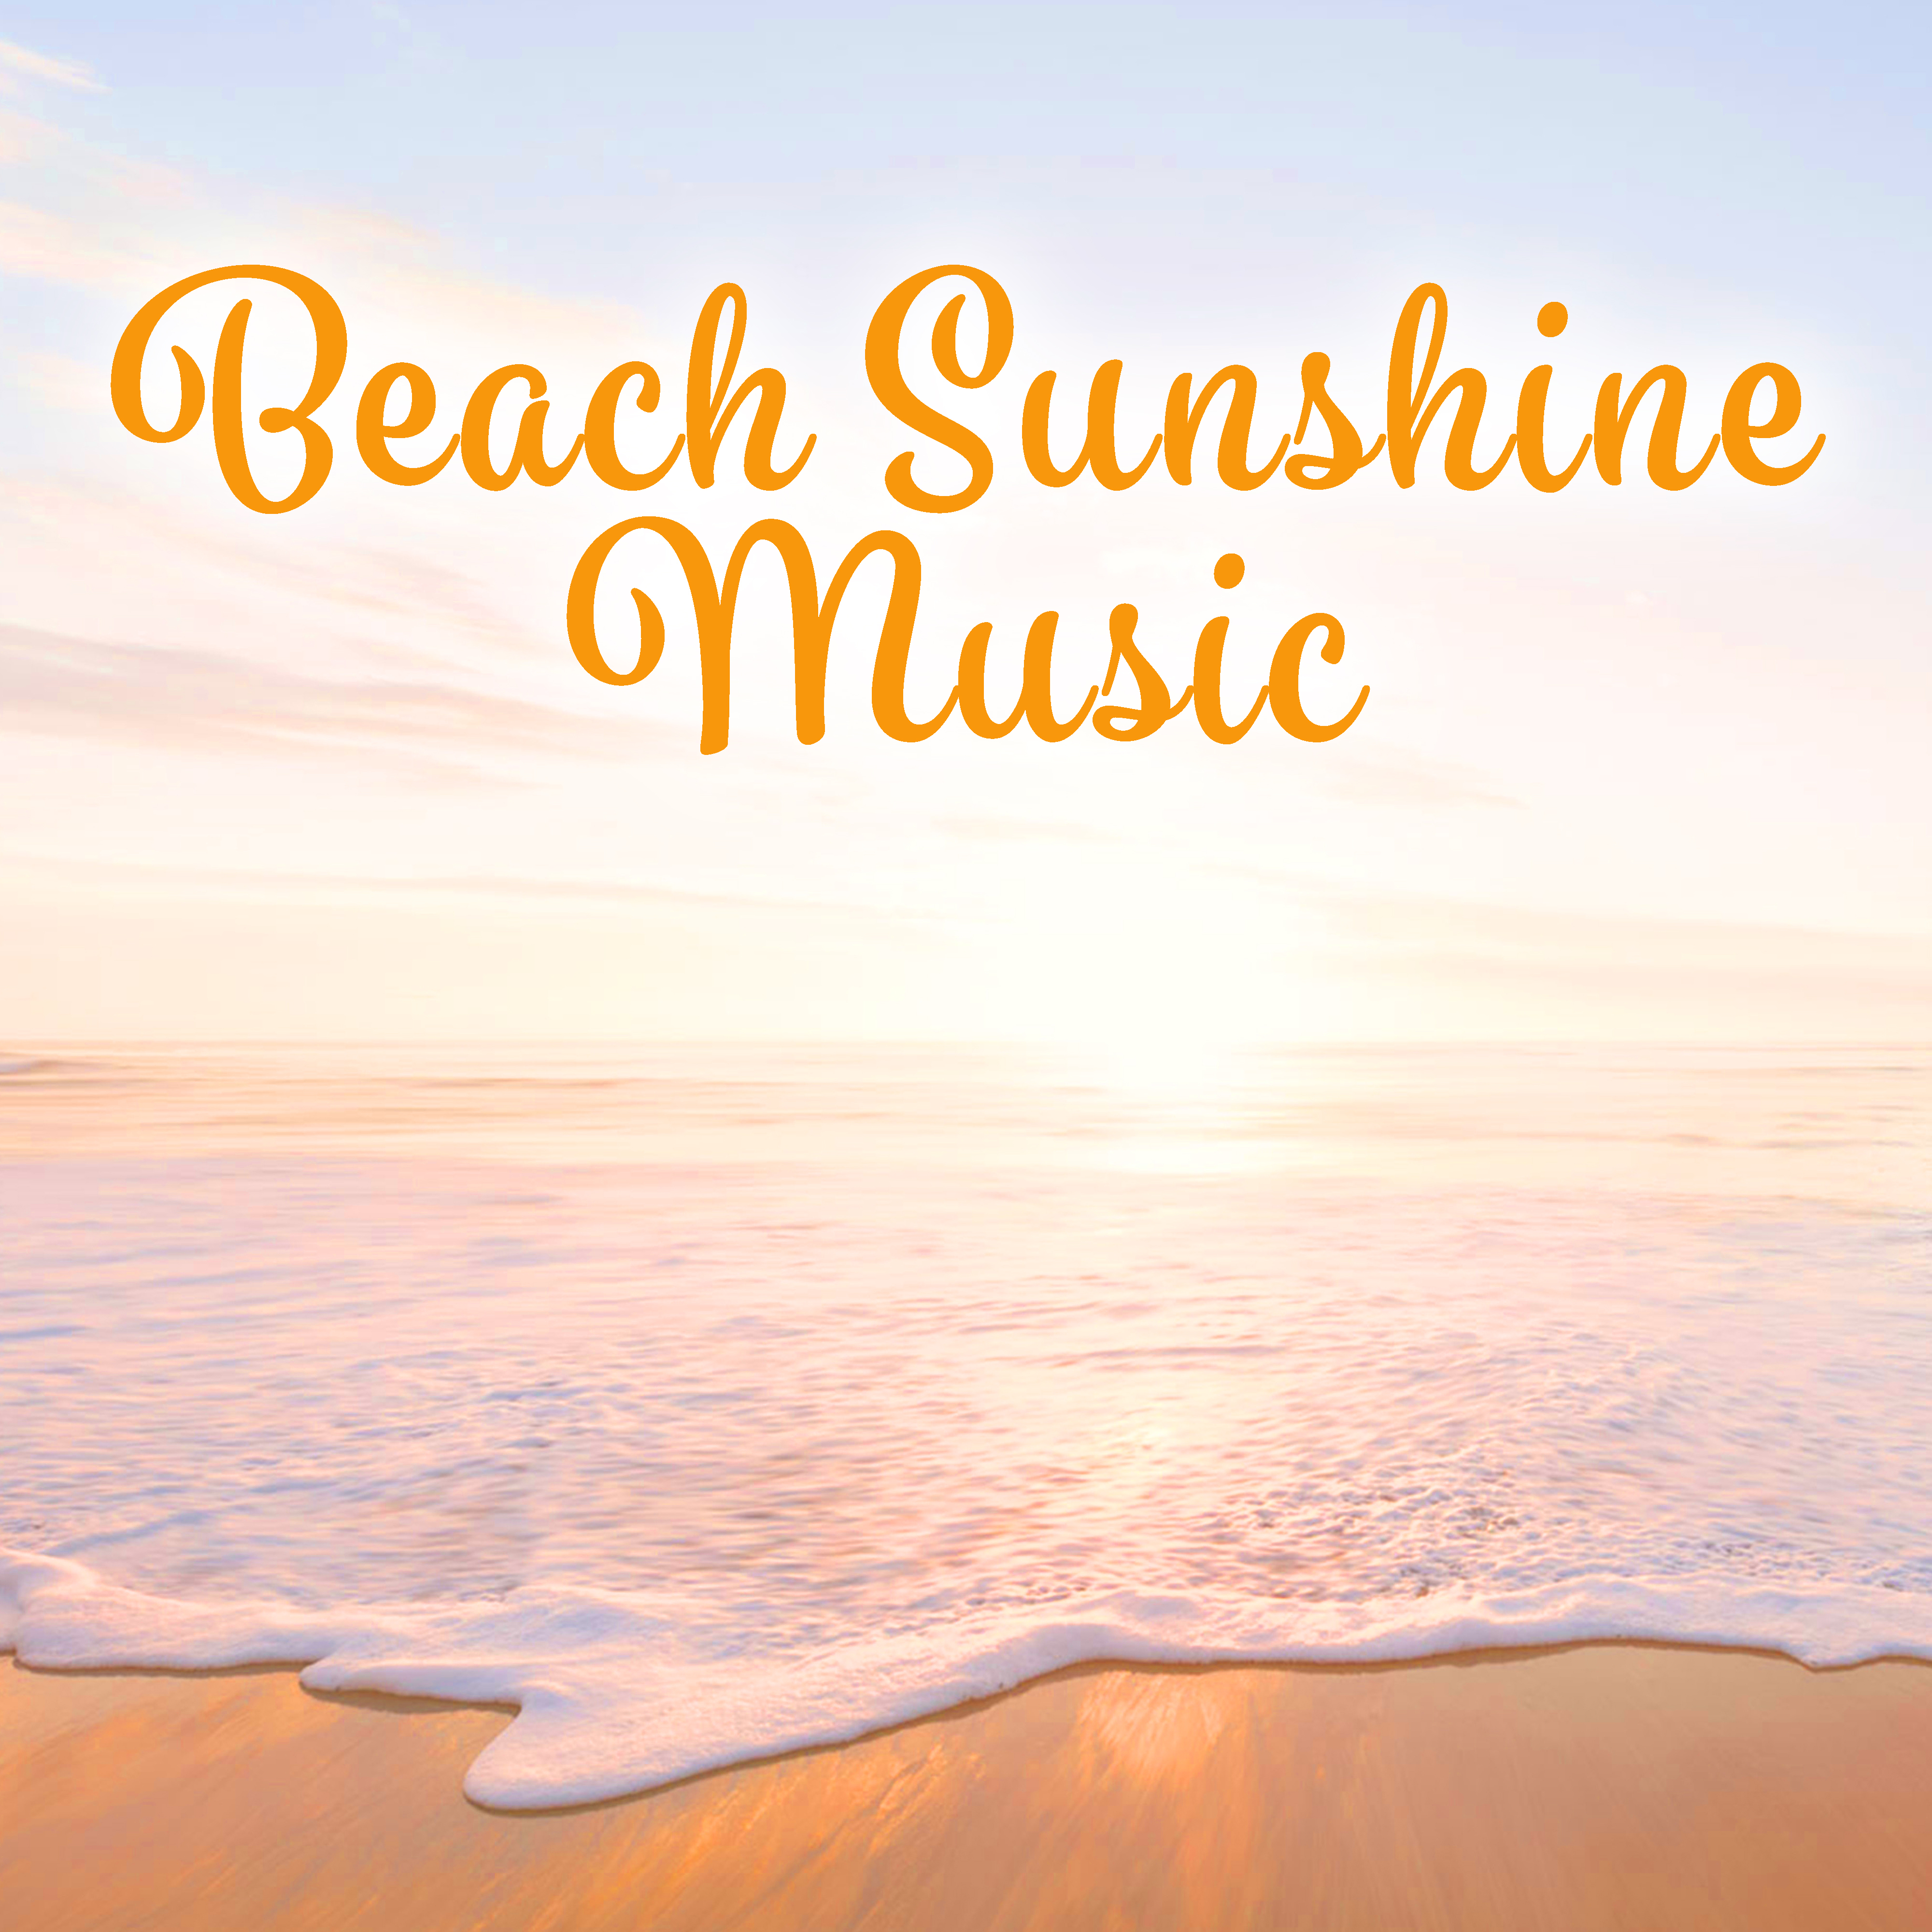 Beach Sunshine Music – Chill Out Music, Sounds to Relax, Morning Melodies to Rest, Easy Listening